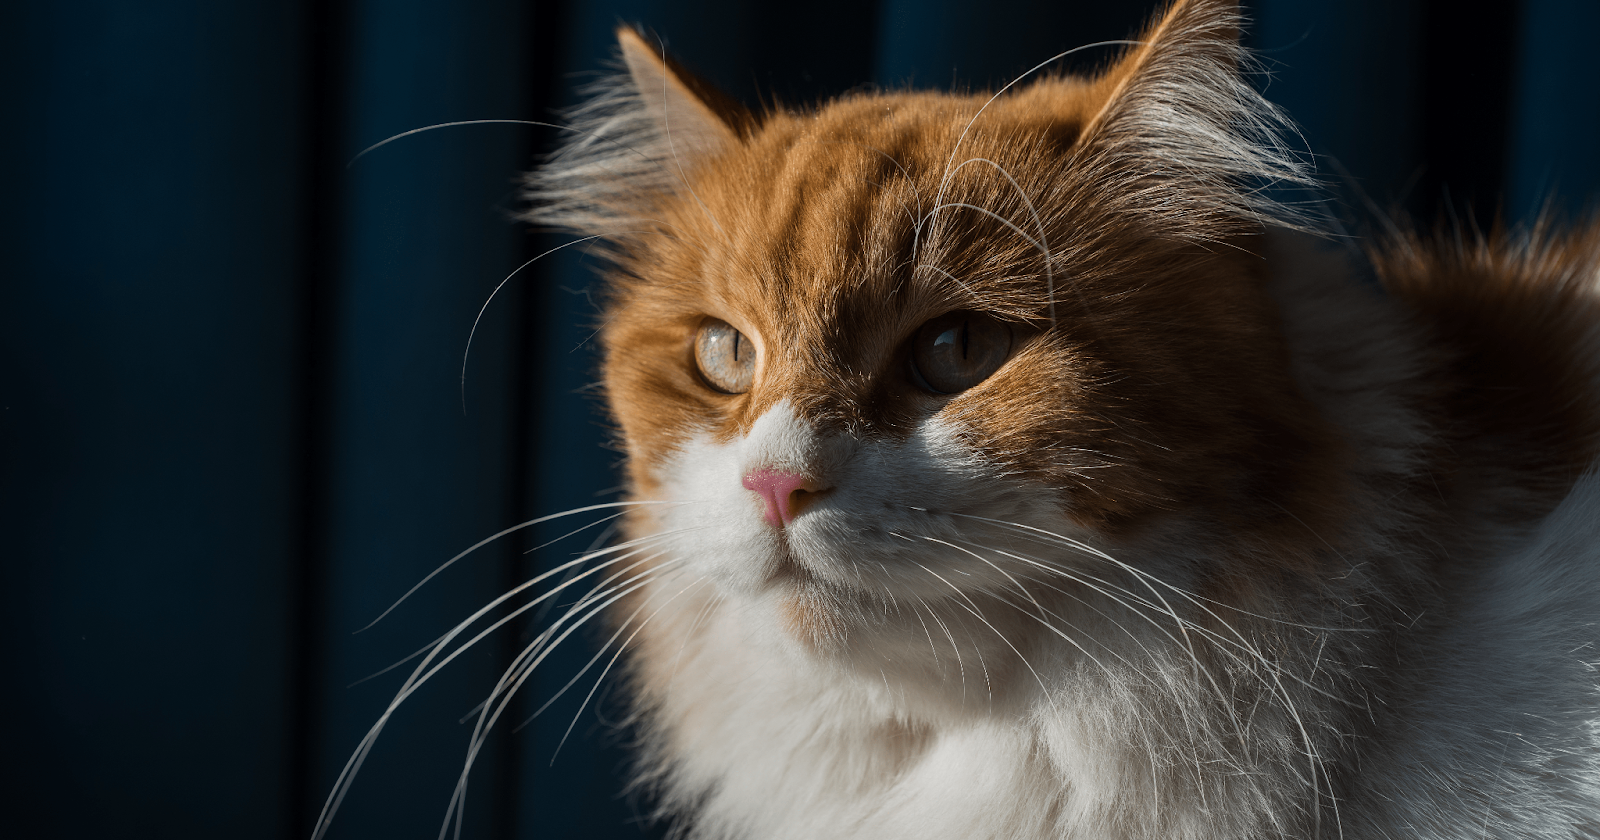 ginger and white cat in black background